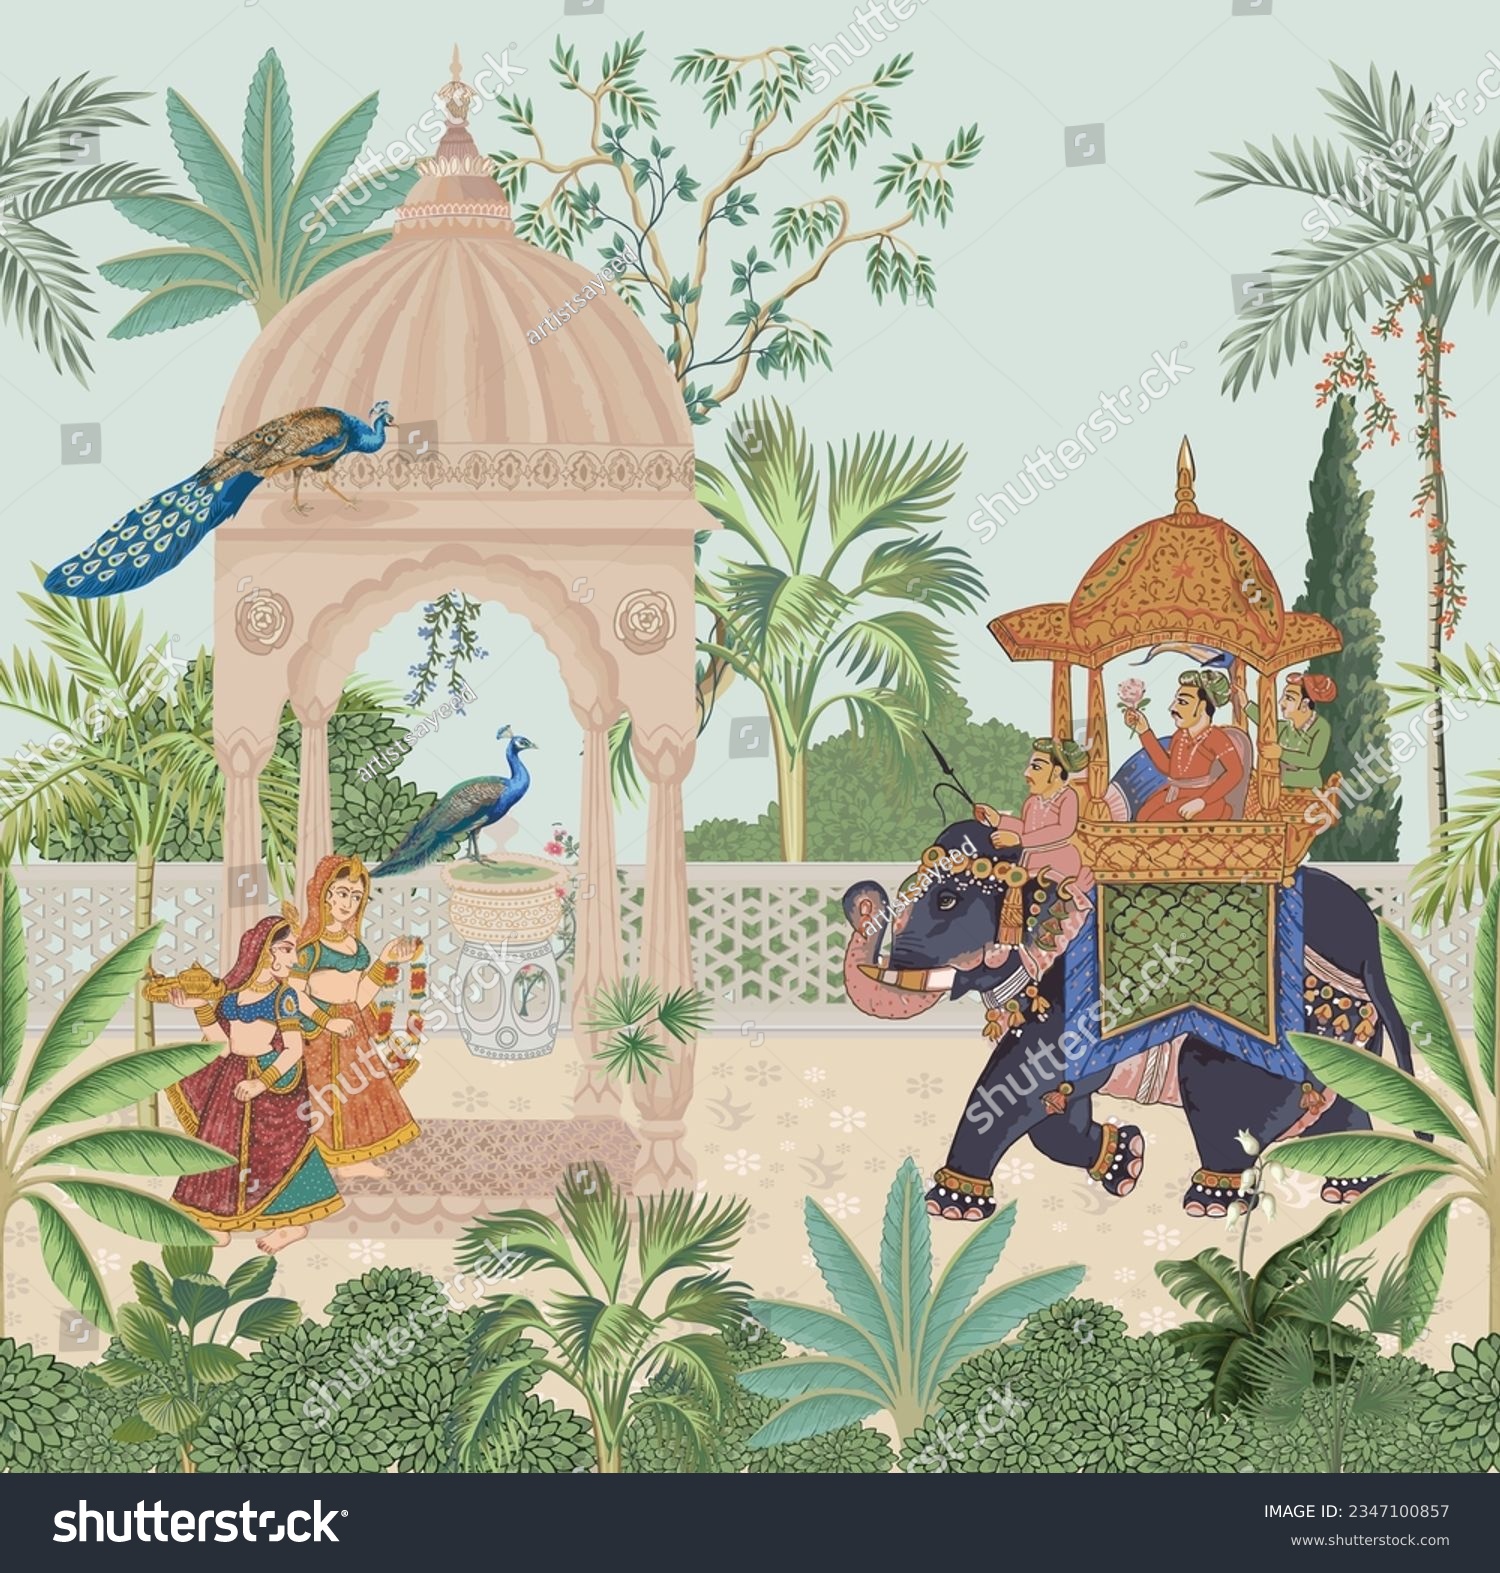 Indian Mughal king riding elephant in a garden with queen, woman, peacock, tree illustration for wall art #2347100857